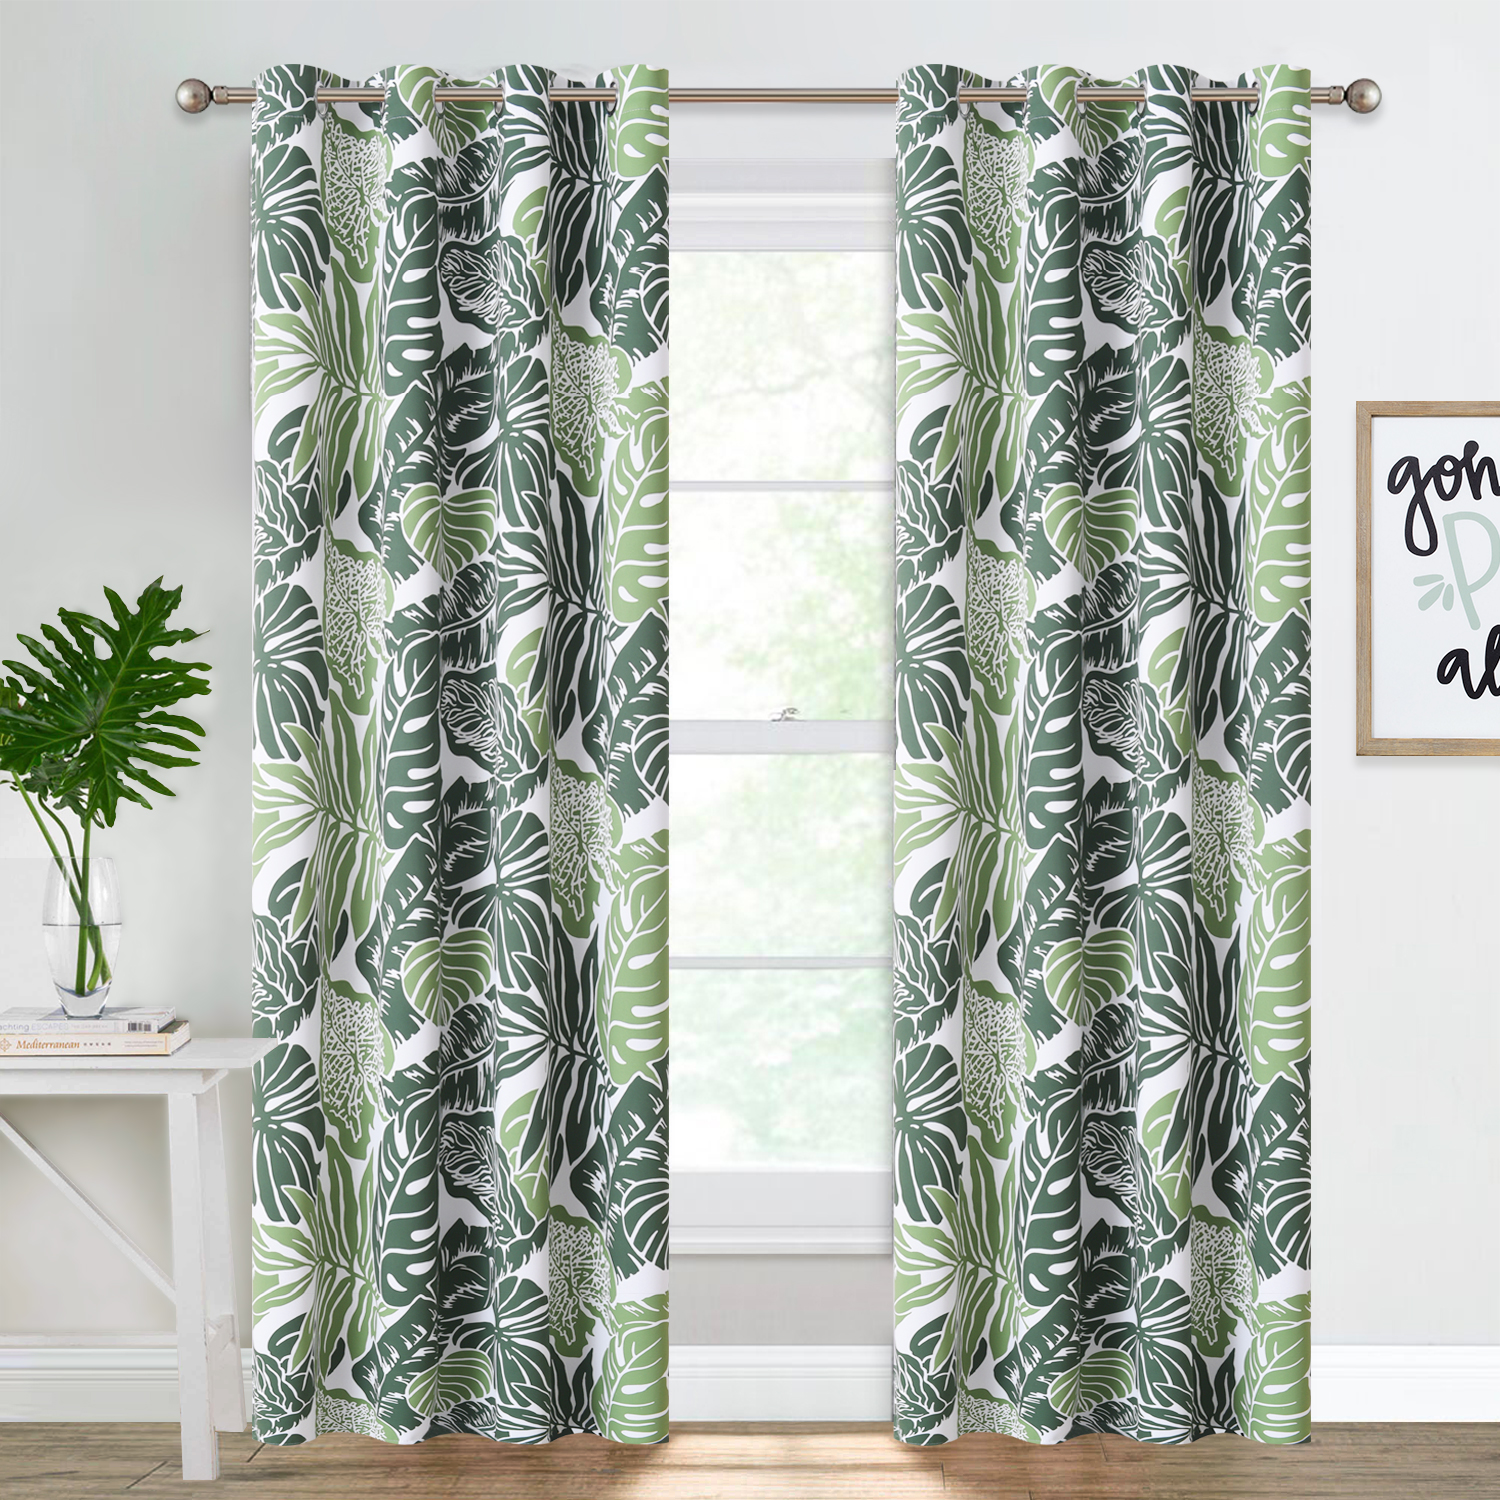 Discount Banana Leaf Blackout Curtain, Sold As 2 Panels